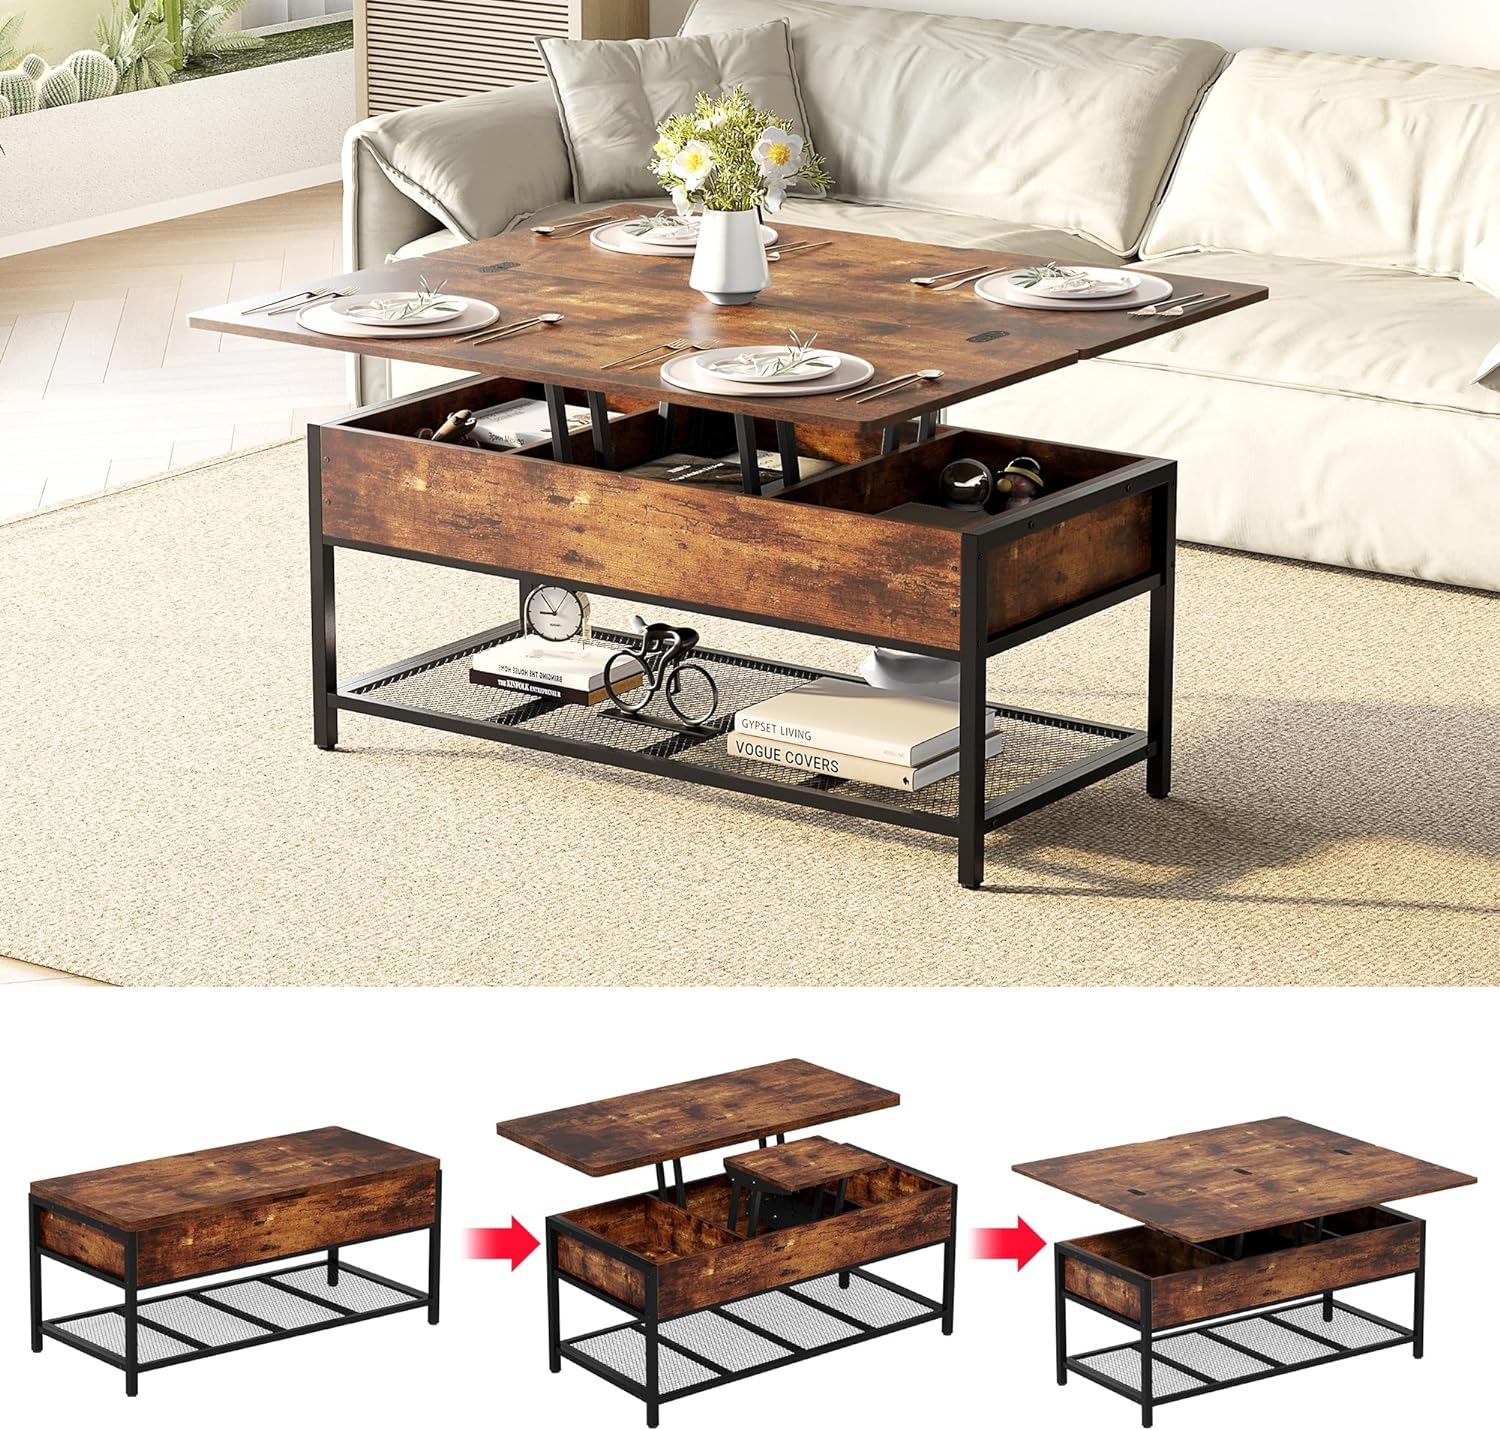 HOME BI 43 Lift Top Coffee Tables for Living Room, Coffee Table with Lifting Top 3 in 1 Multi-Function Coffee Table converts to Dining Table Coffee Table with Storage (Brown, 43 inch)